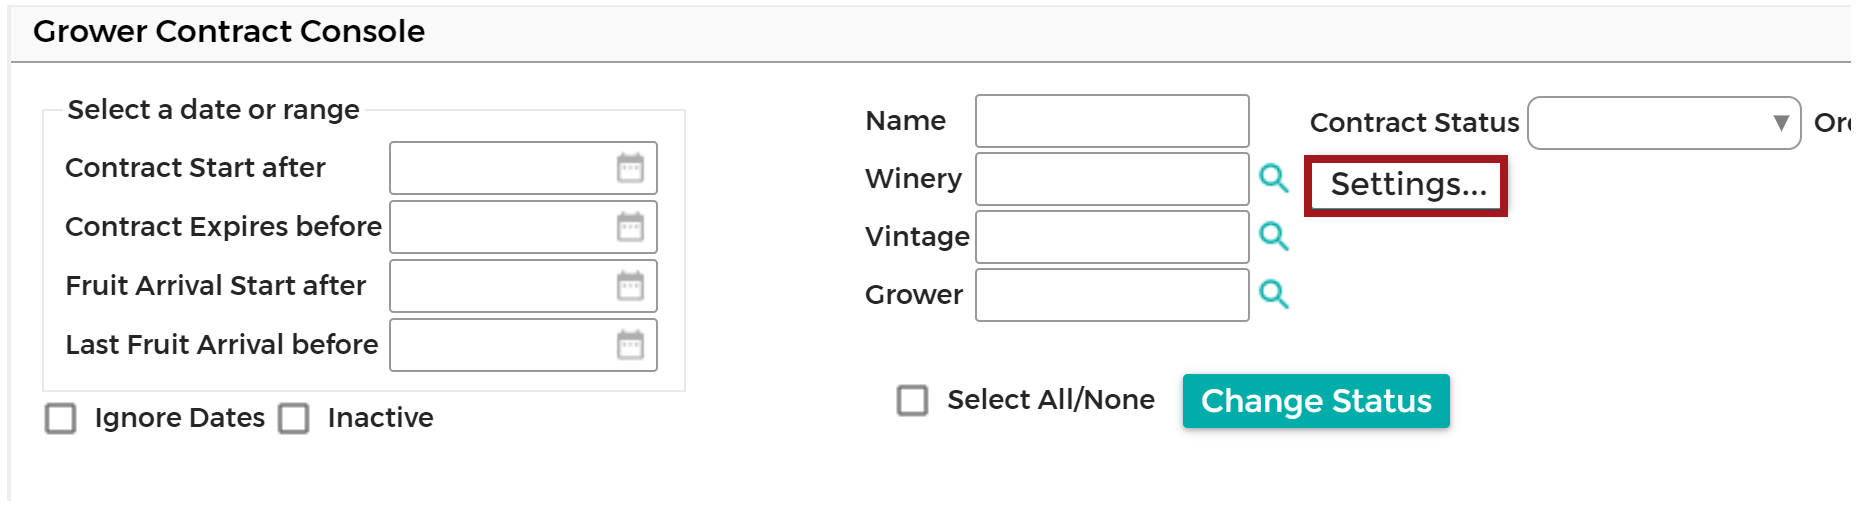 Grower_Contract_Console_-_Settings_Button_20200416.png